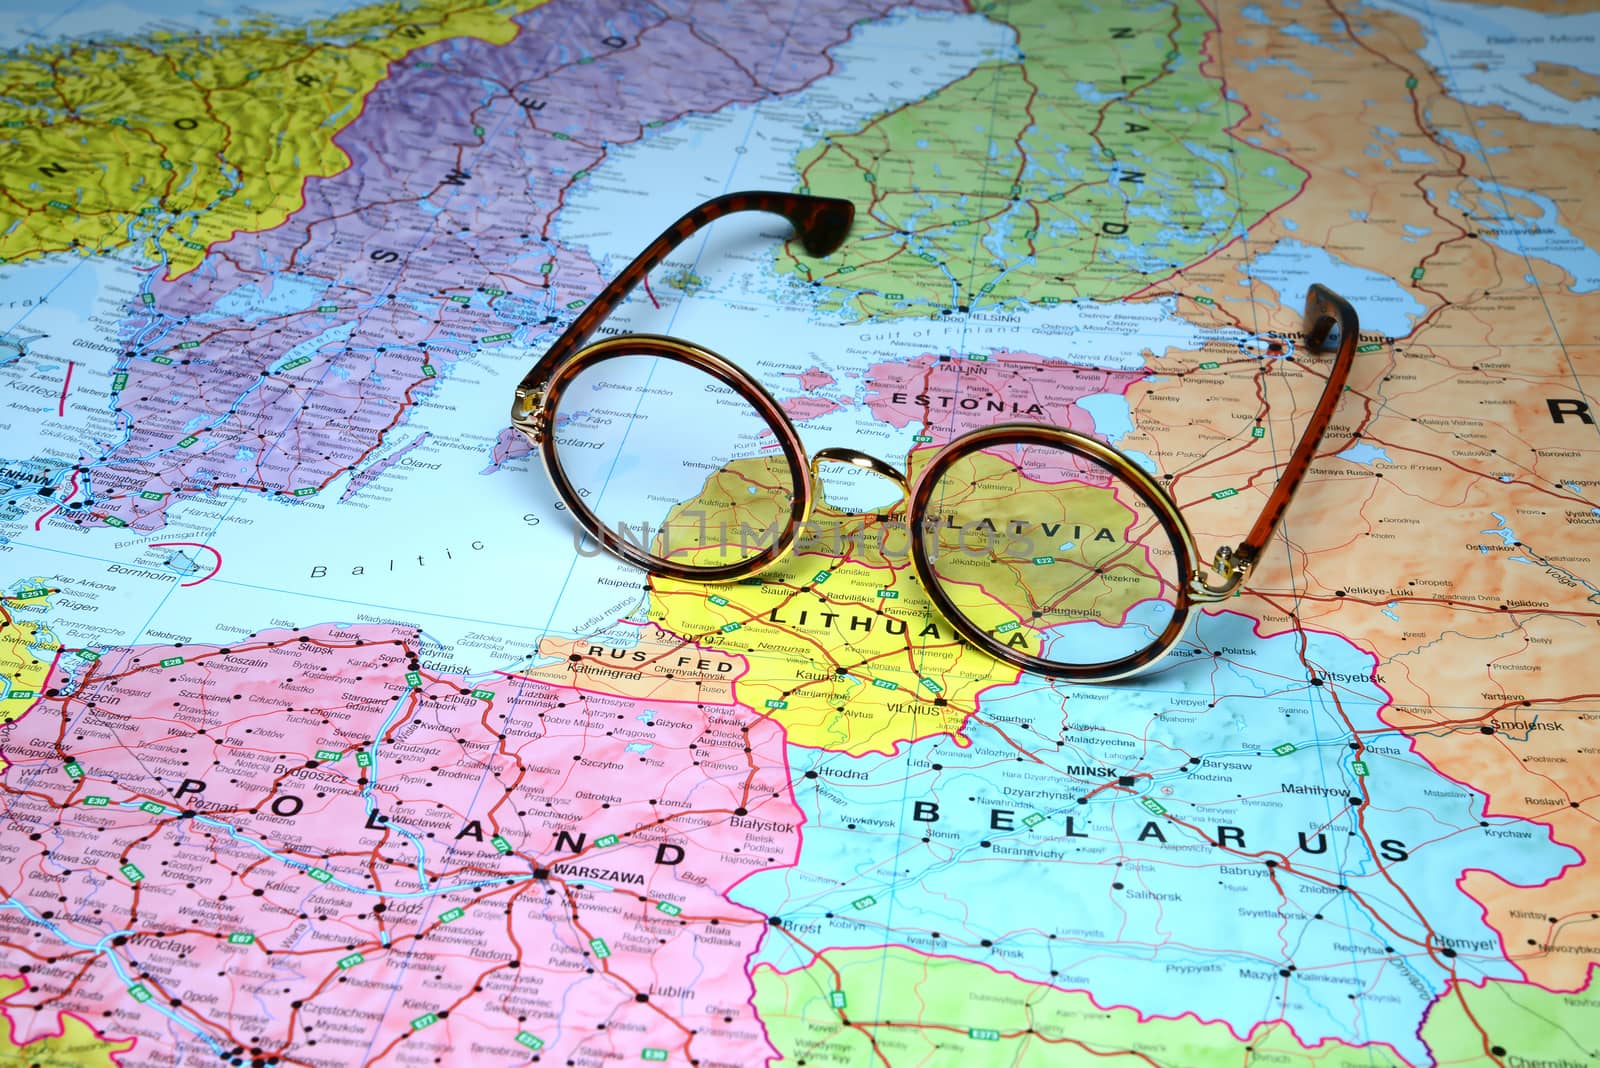 Photo of glasses on a map of europe. Focus on Latvia country. May be used as illustration for traveling theme.